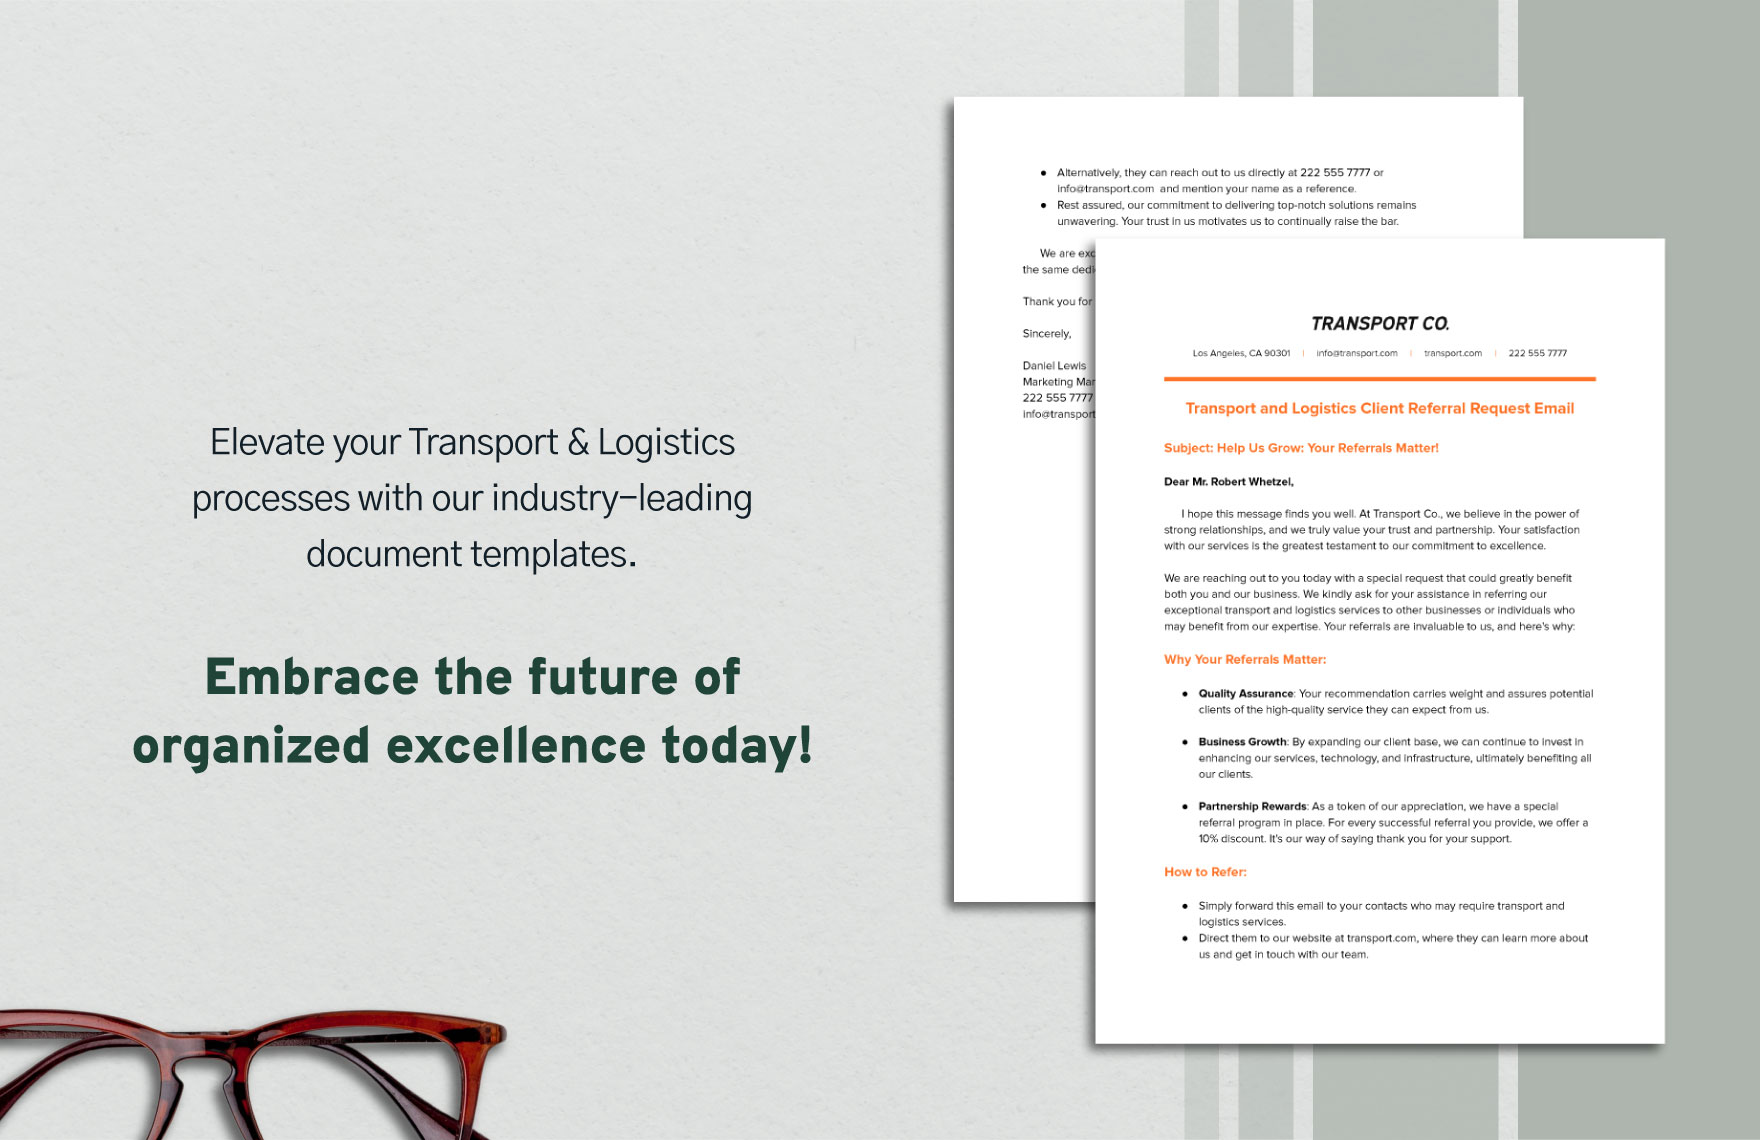 Transport and Logistics Client Referral Request Email Template